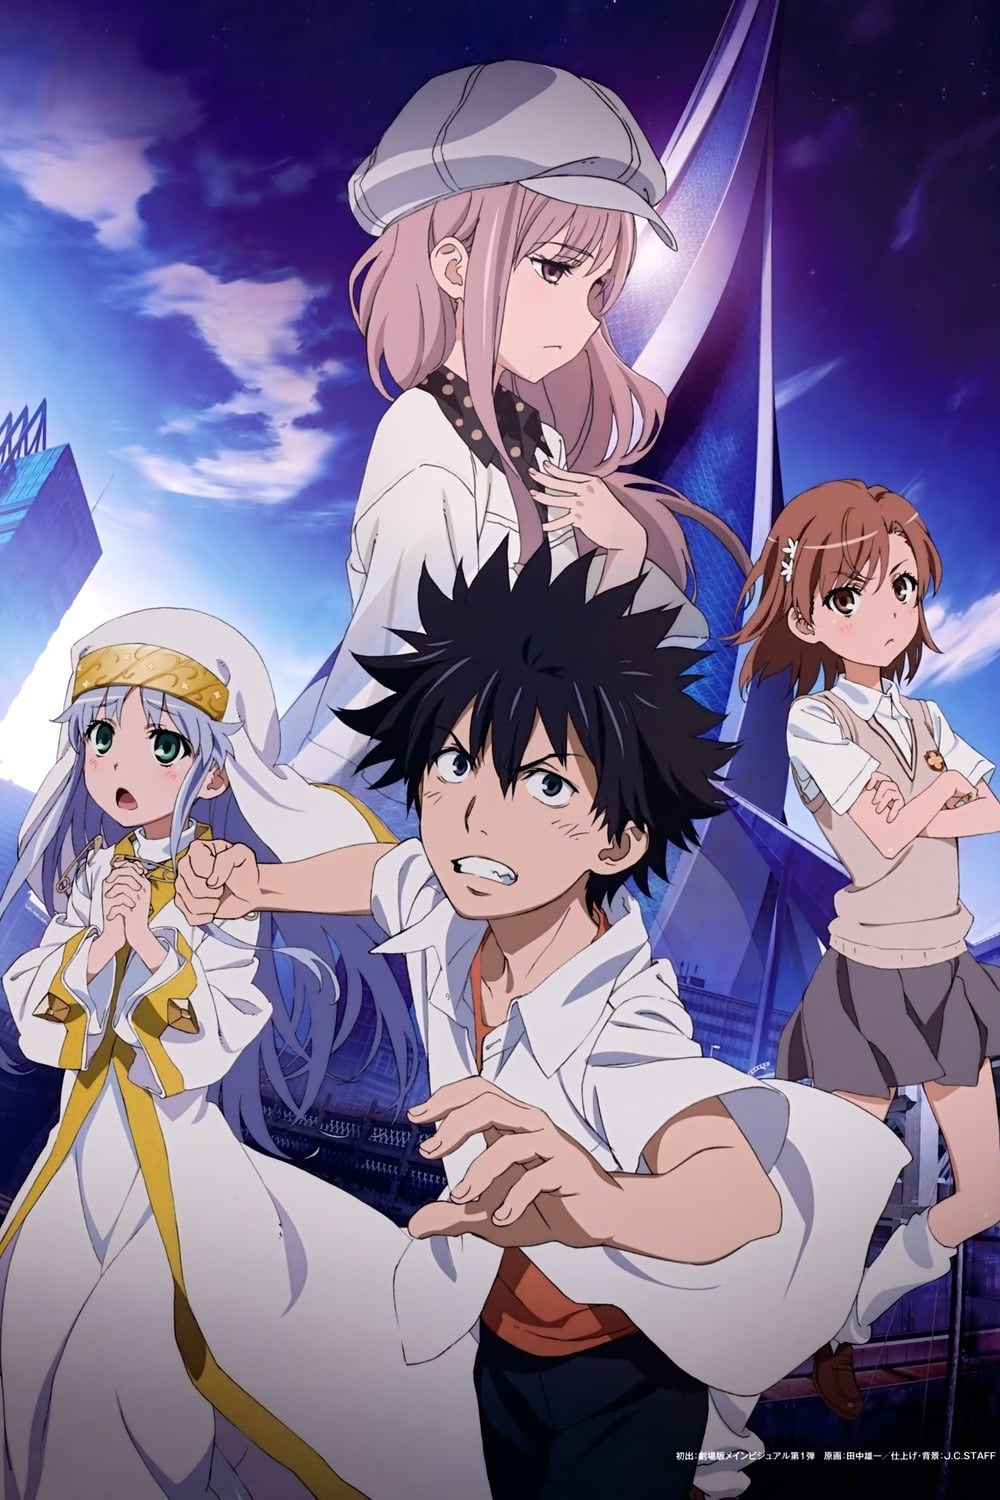 A Certain Magical Index: The Miracle of Endymion Special